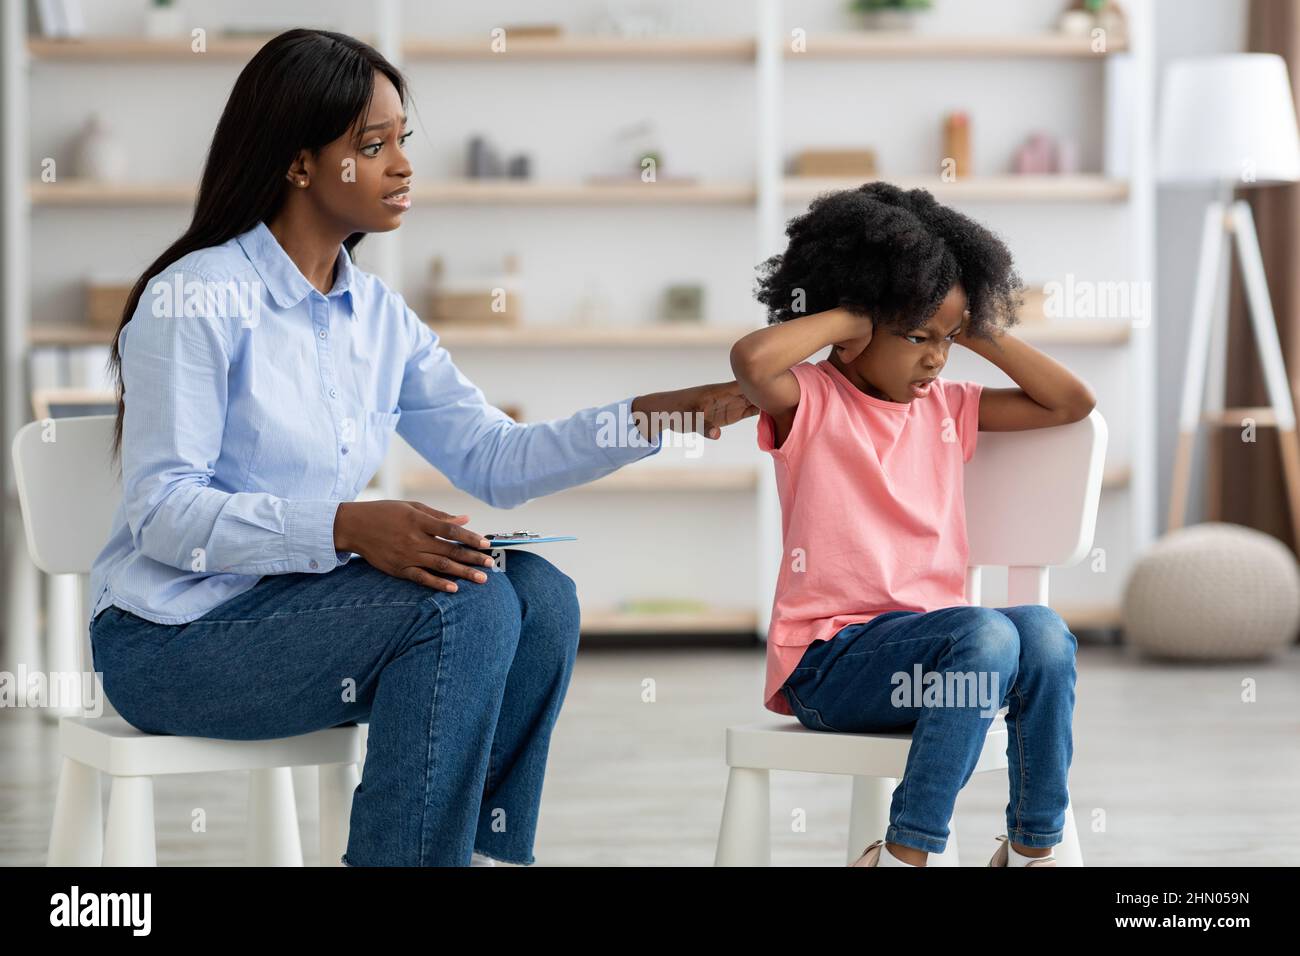 Worried black woman psychotherapist talking to unruly little girl Stock Photo